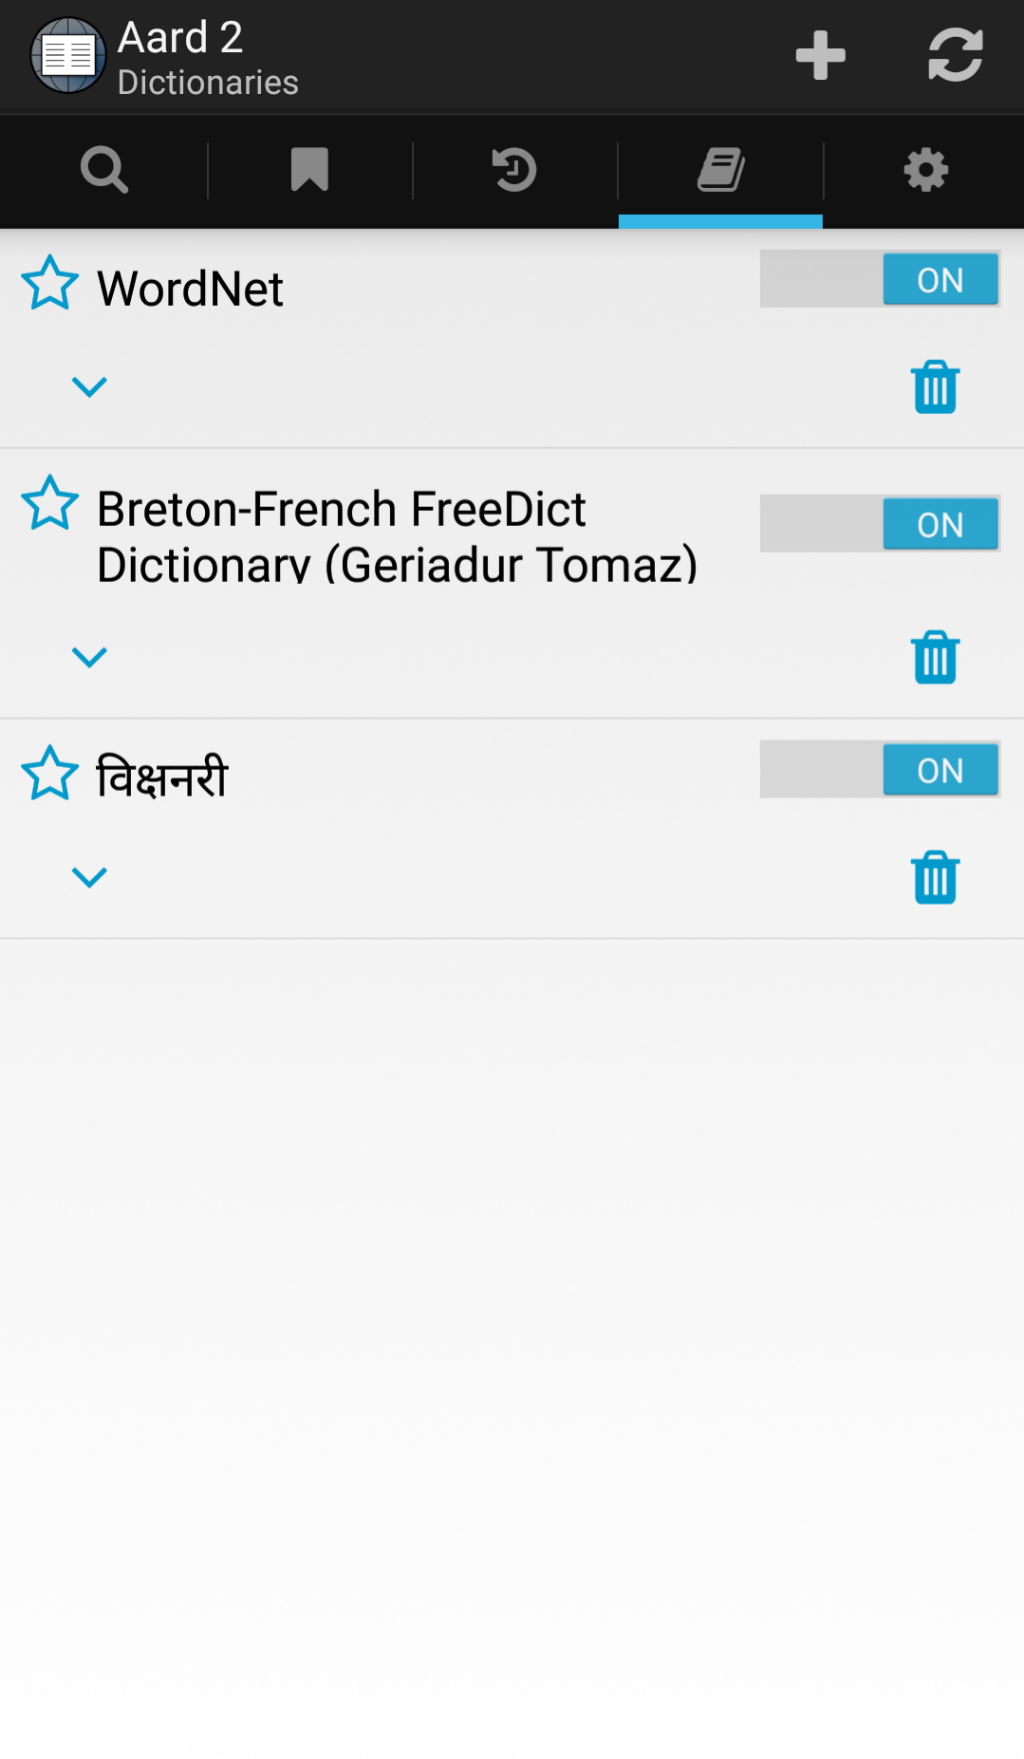 AARD 2 is the best offline dictionary and lets you add dictionaries from any source